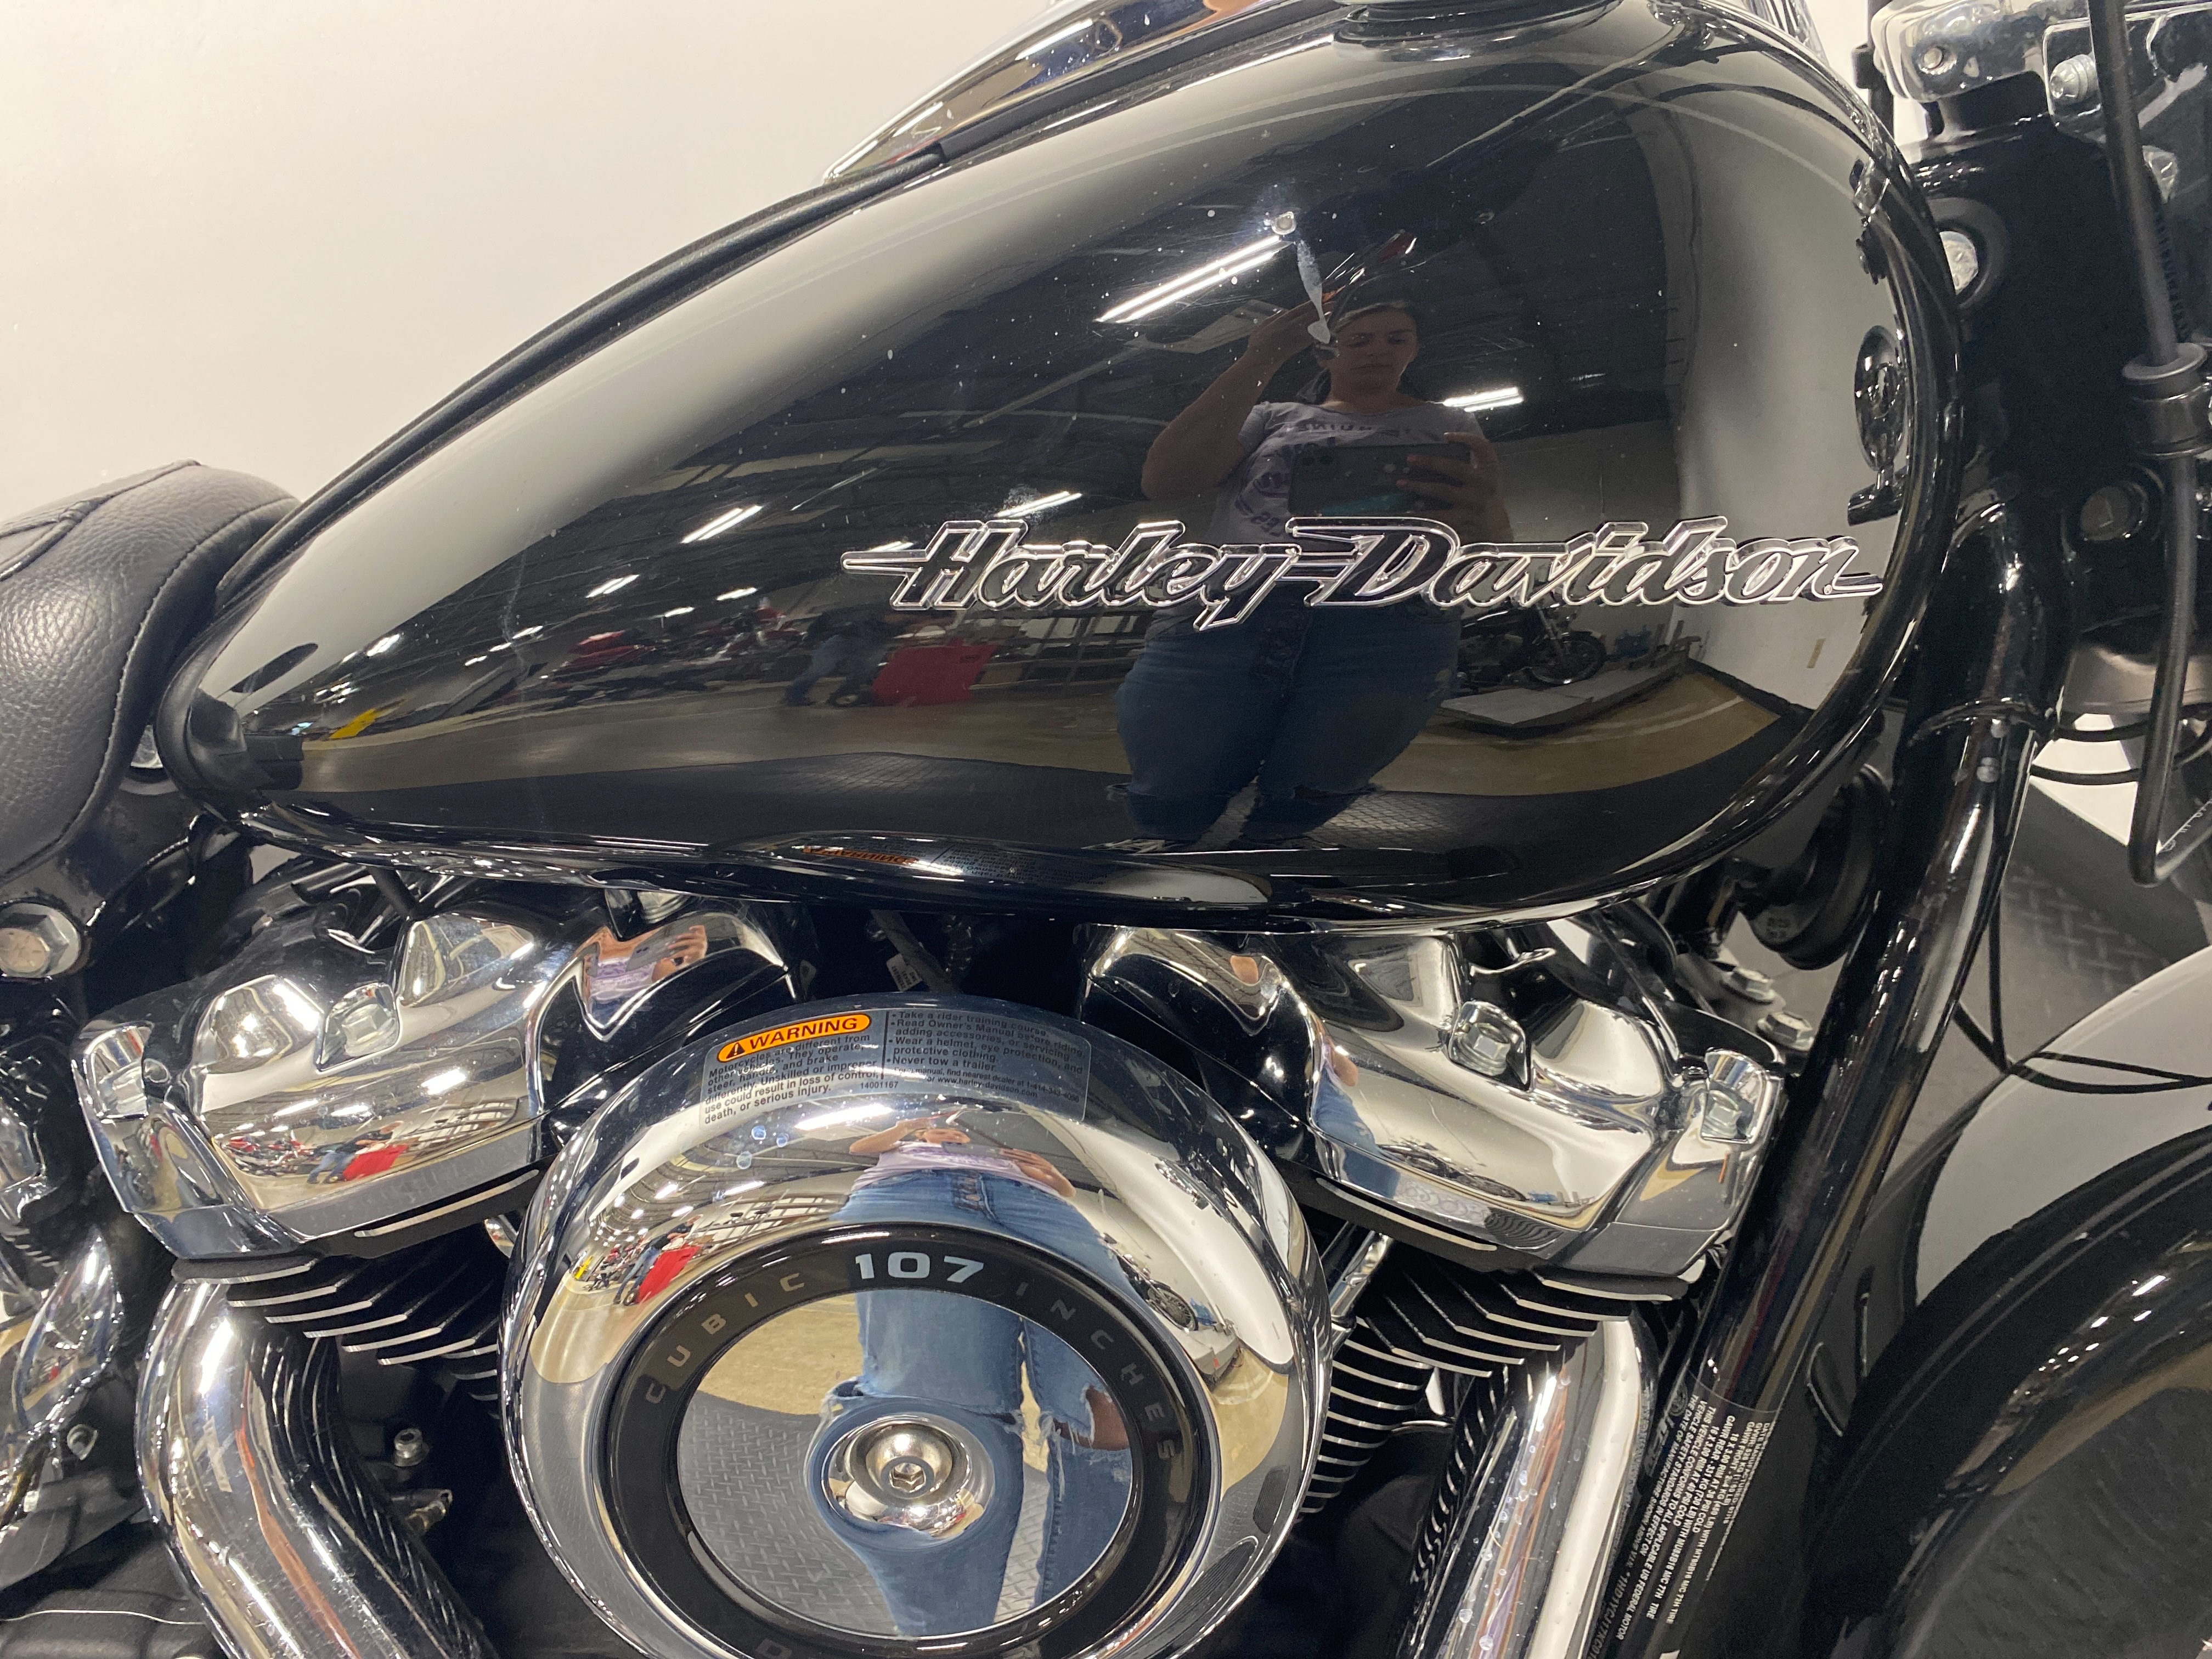 2019 Harley-Davidson Softail Deluxe at Cannonball Harley-Davidson